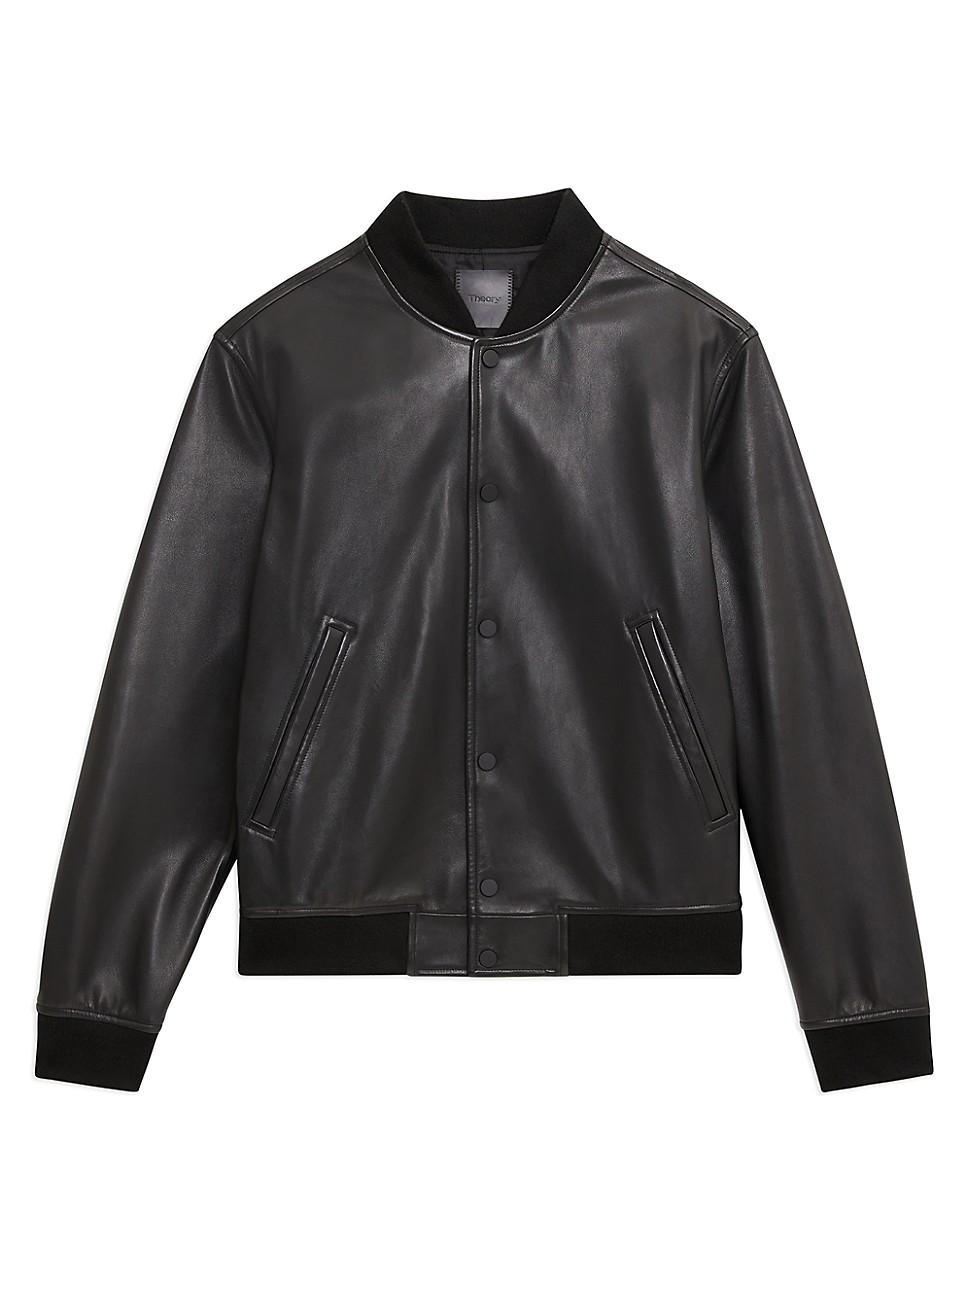 Theory Leather Varsity Jacket in Black for Men | Lyst